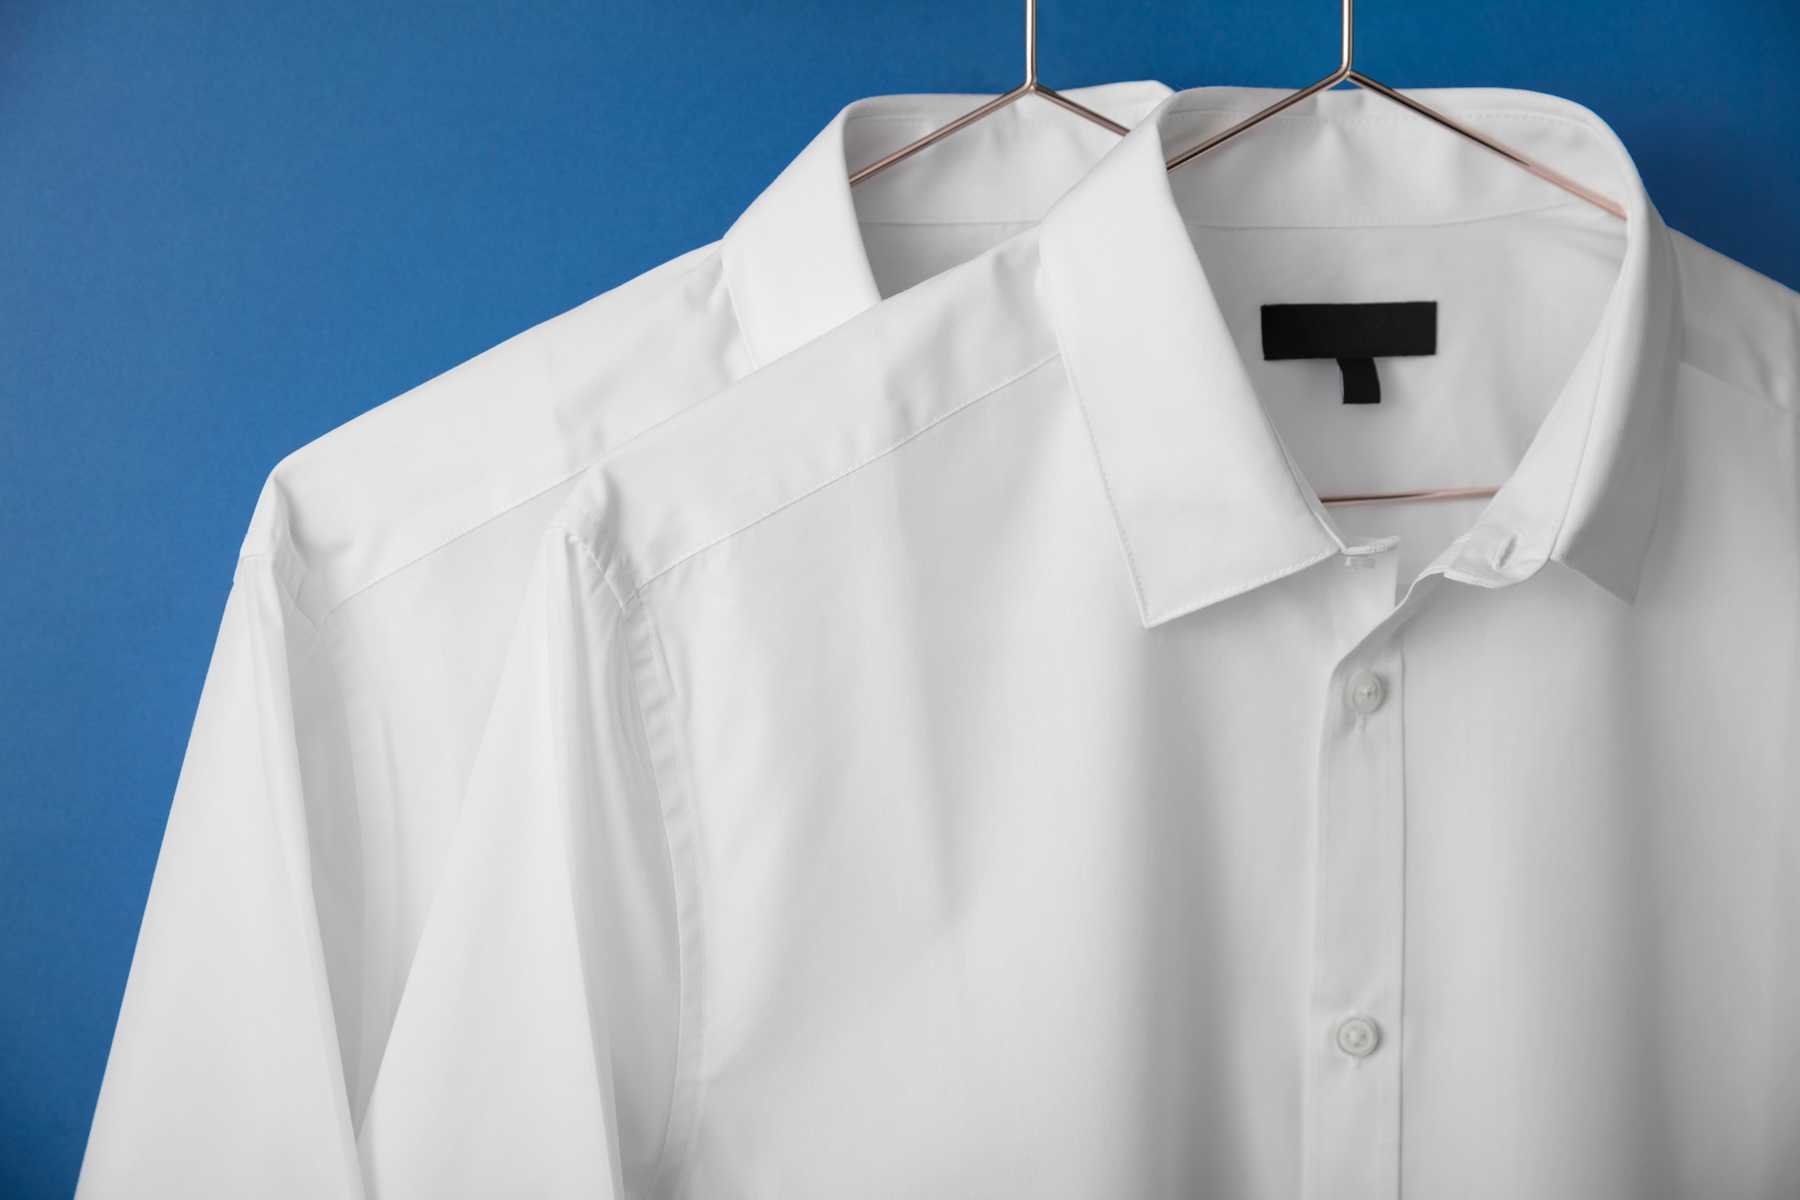 How to Wash Dress Shirts Without Ironing